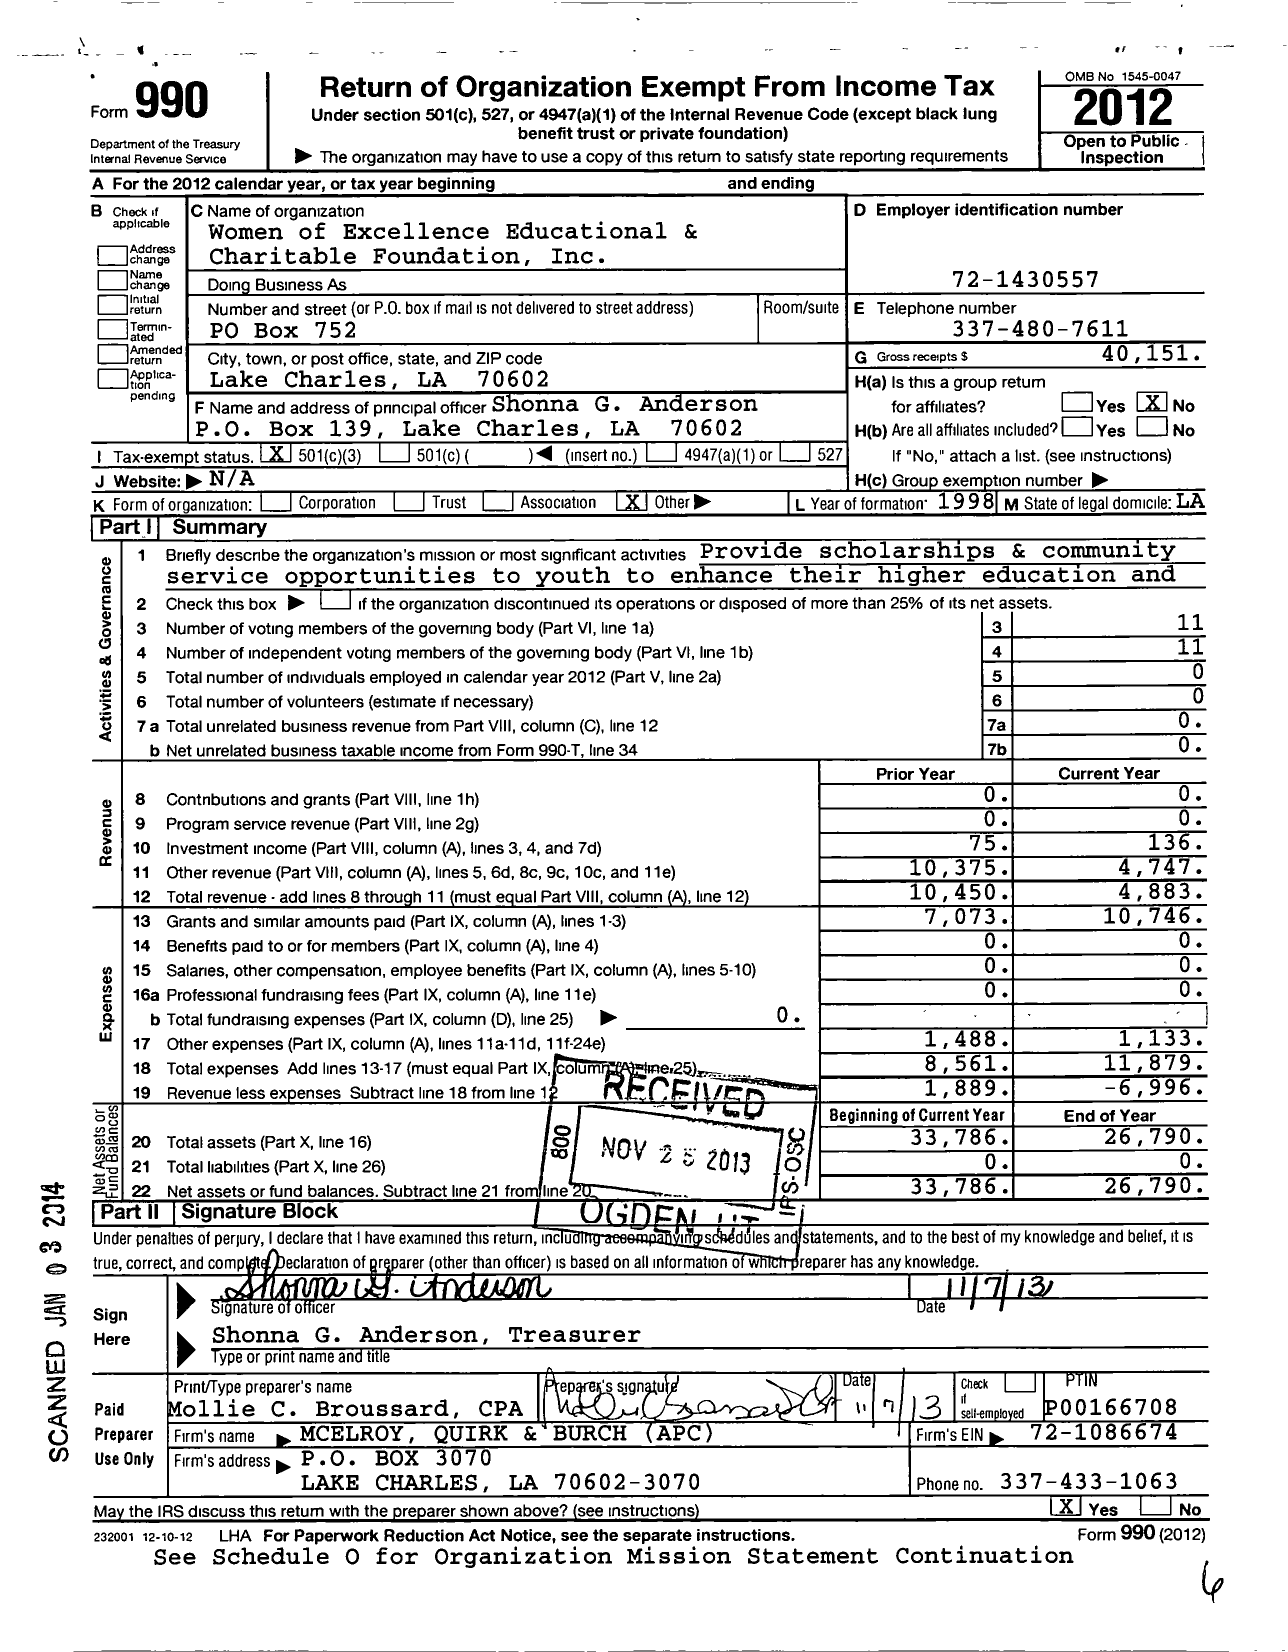 Image of first page of 2012 Form 990 for Women of Excellence Educational and Charitable Foundation